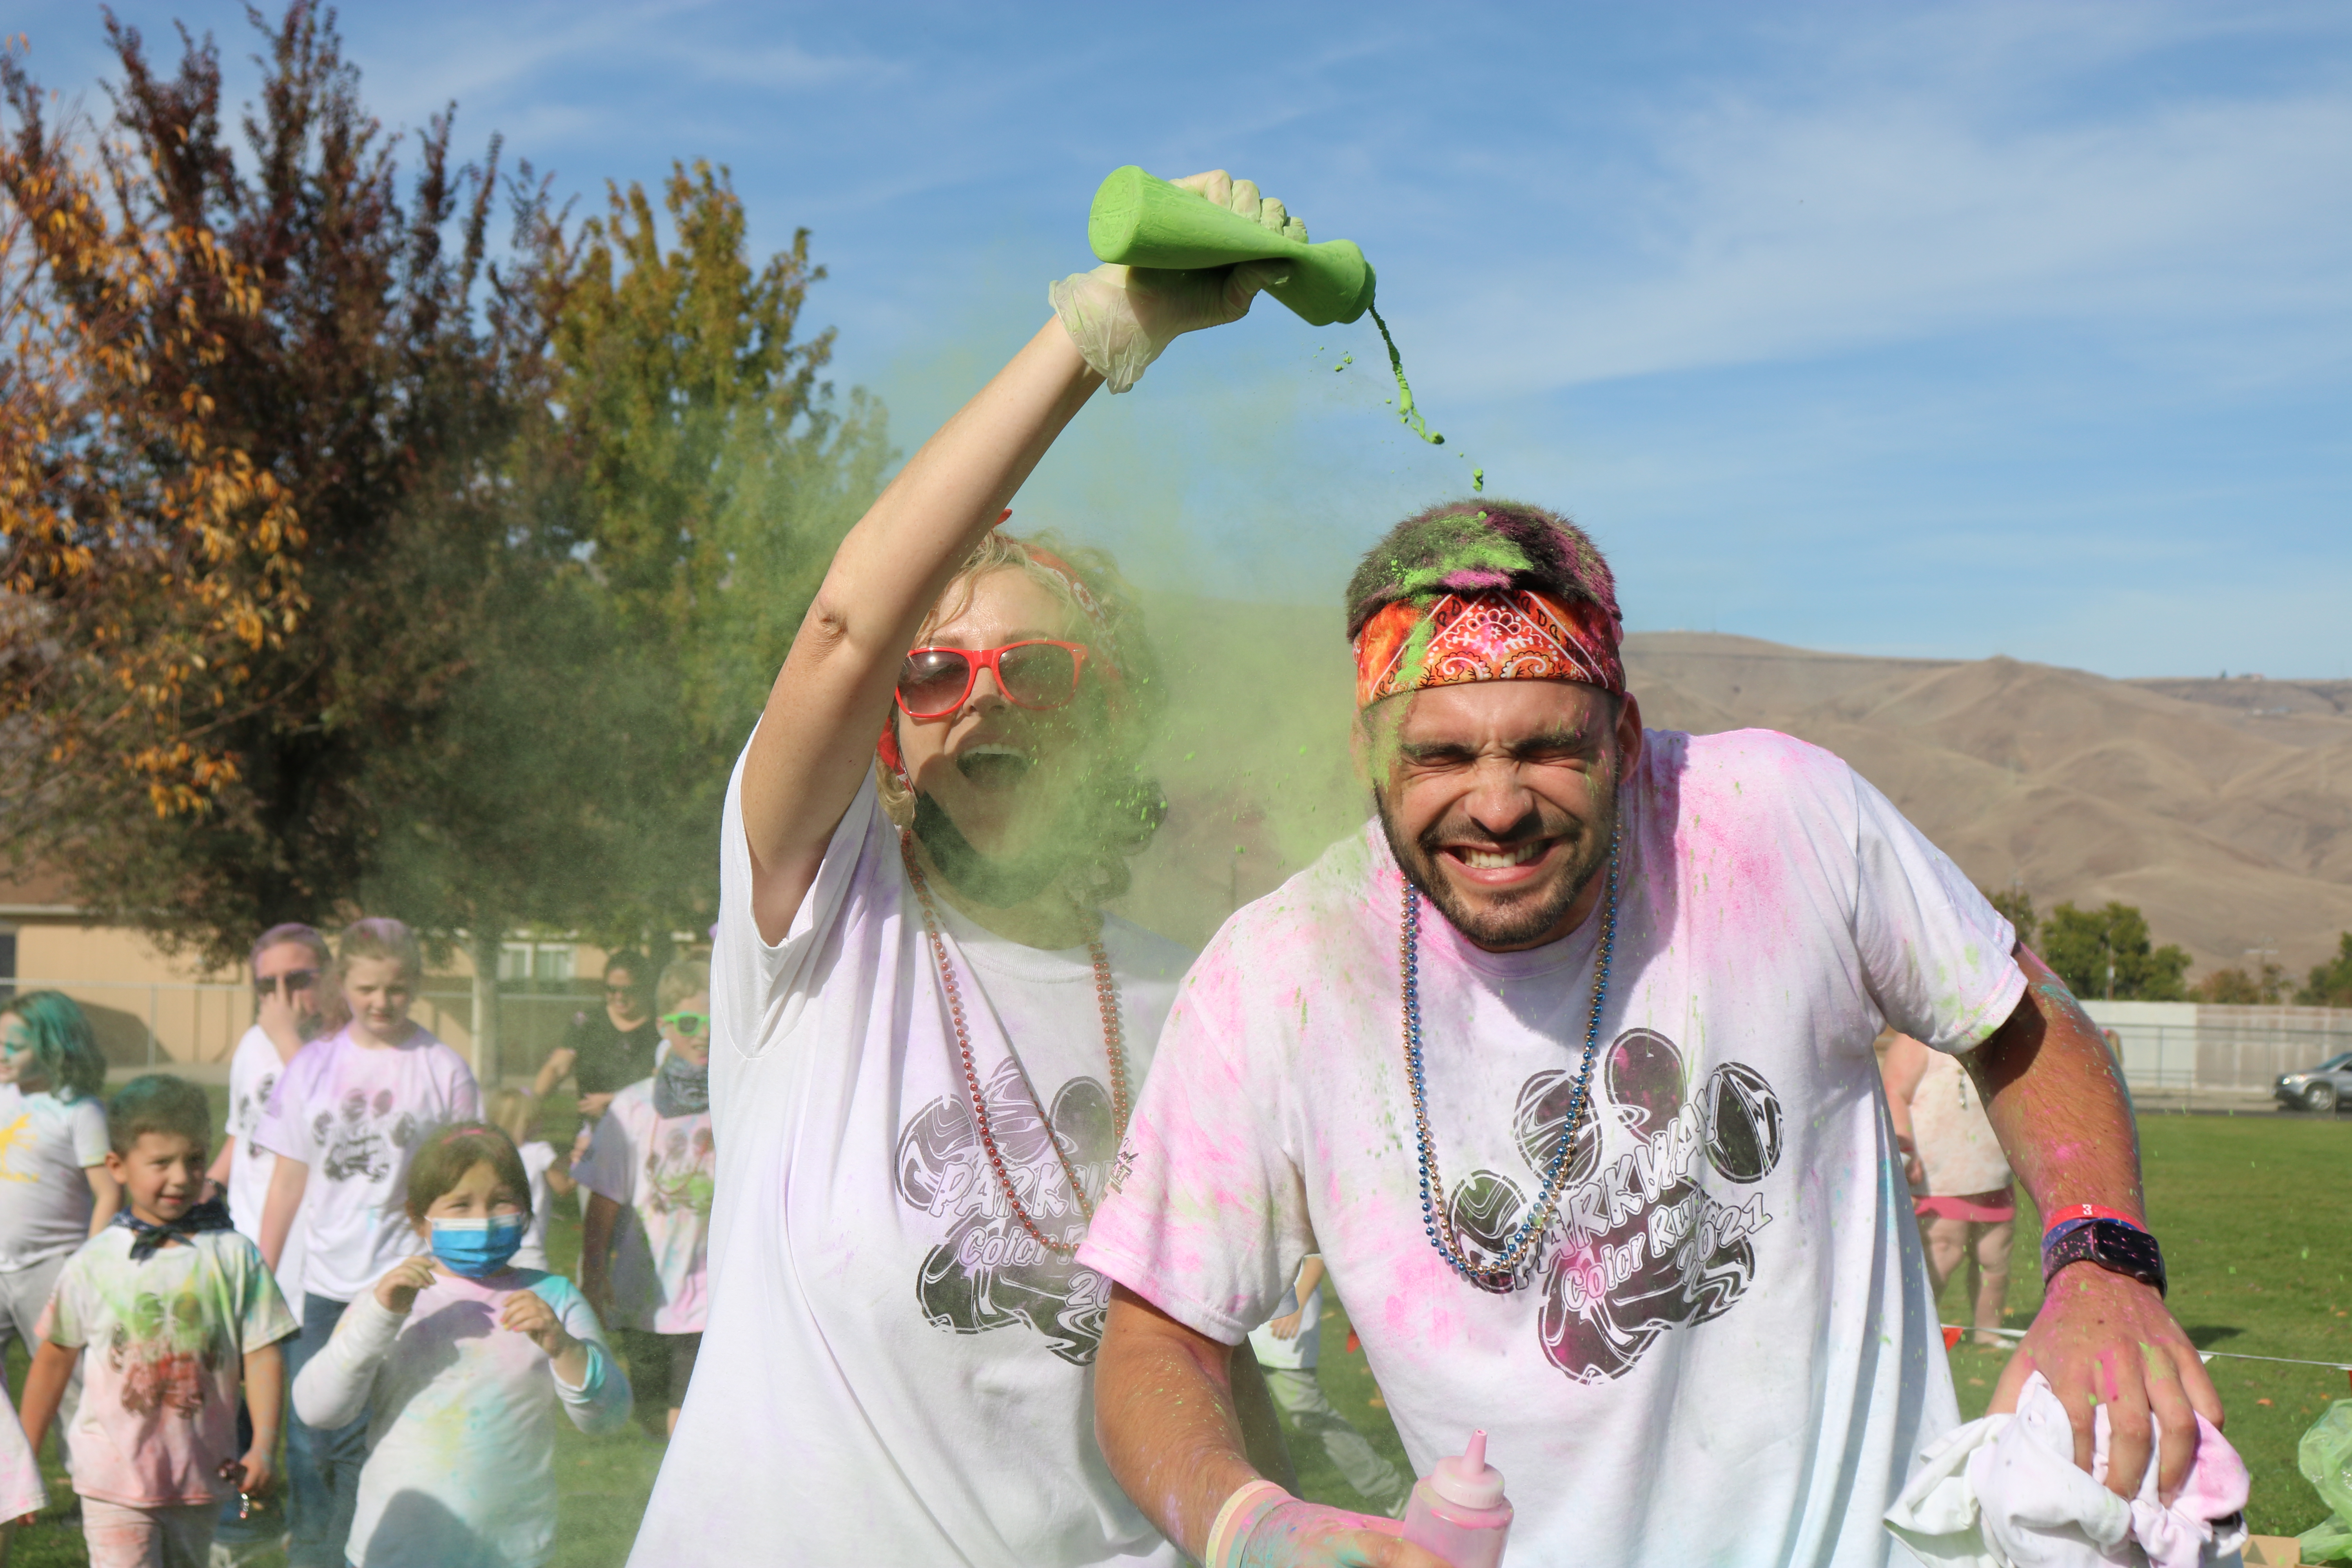 Parkway teacher participating in color run